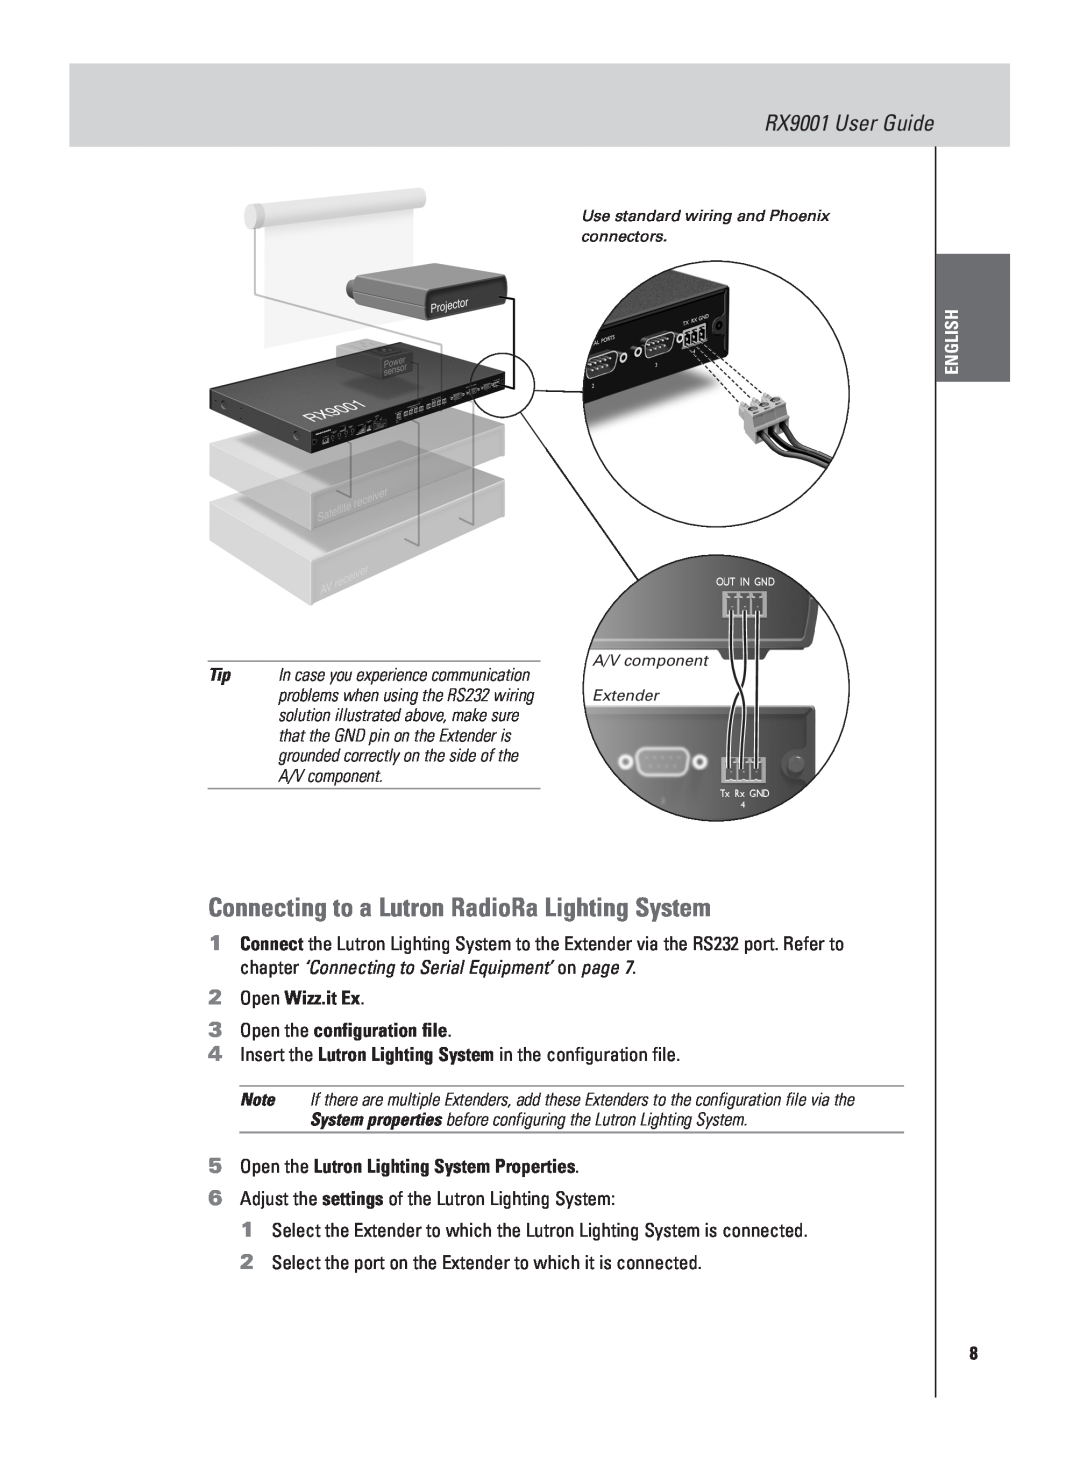 Marantz Connecting to a Lutron RadioRa Lighting System, Tip In case you experience communication, RX9001 User Guide 